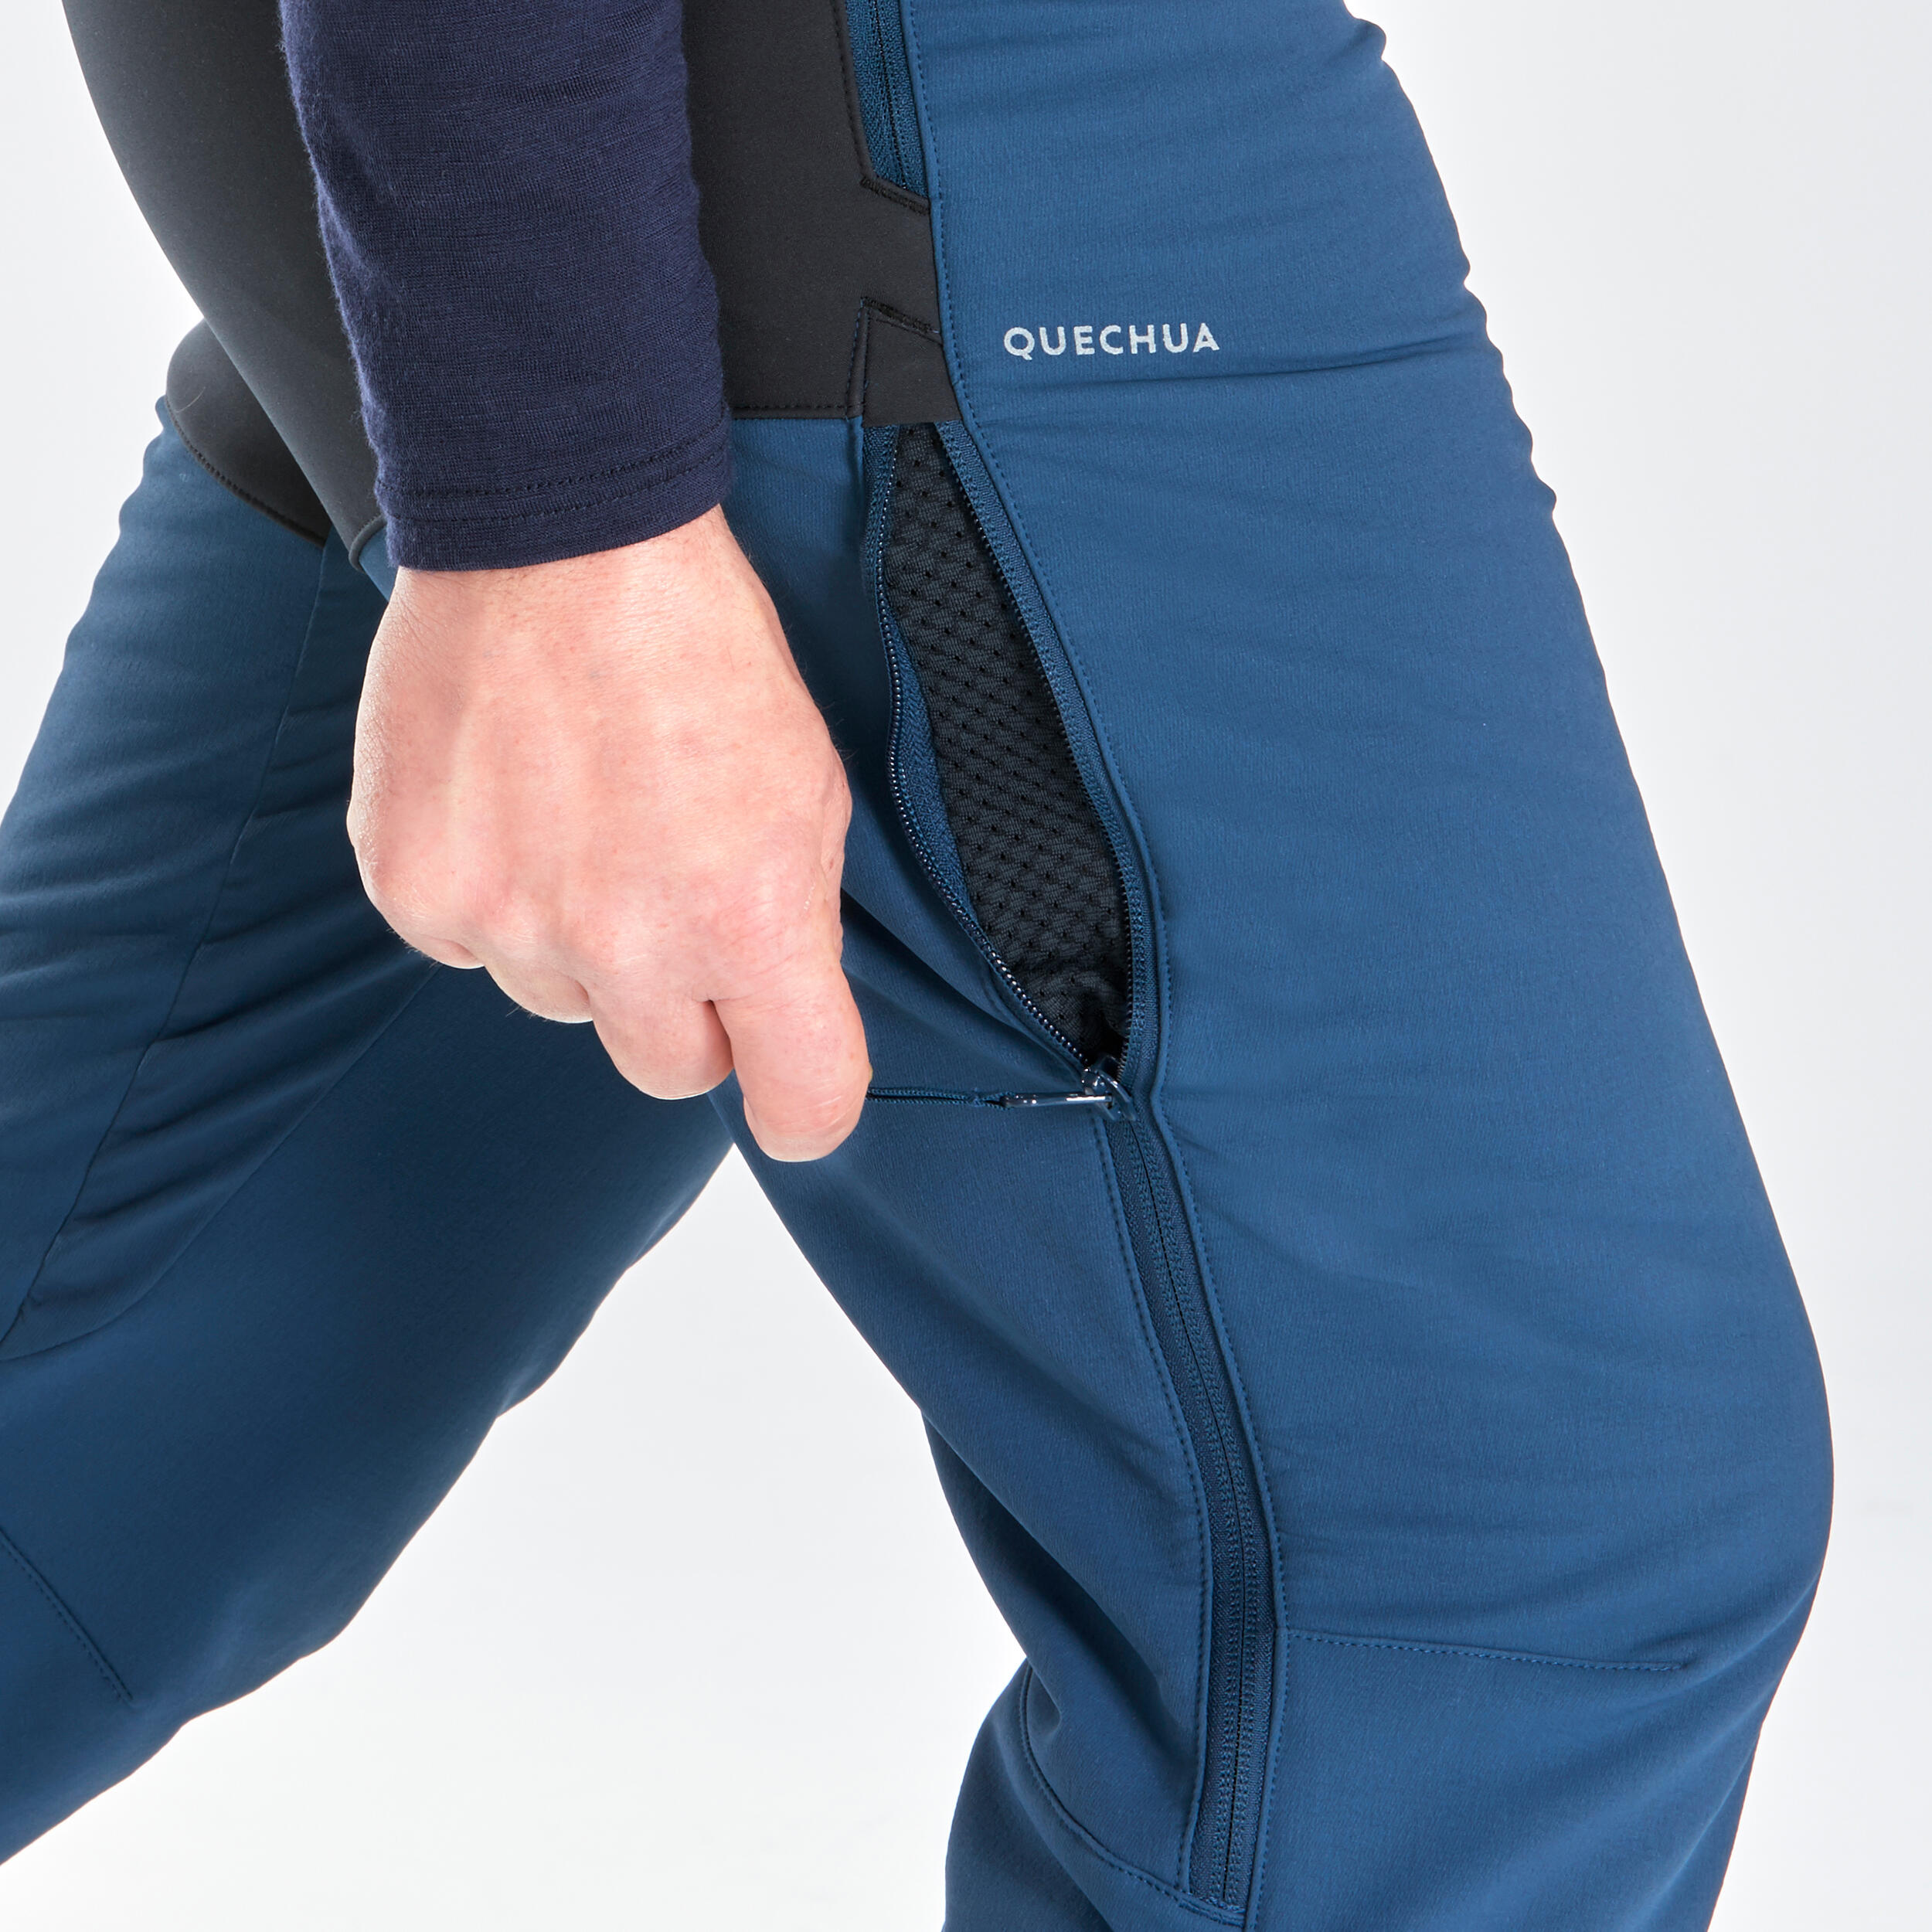 Men’s Warm Water-repellent Ventilated Hiking Trousers - SH500 MOUNTAIN VENTIL   8/10